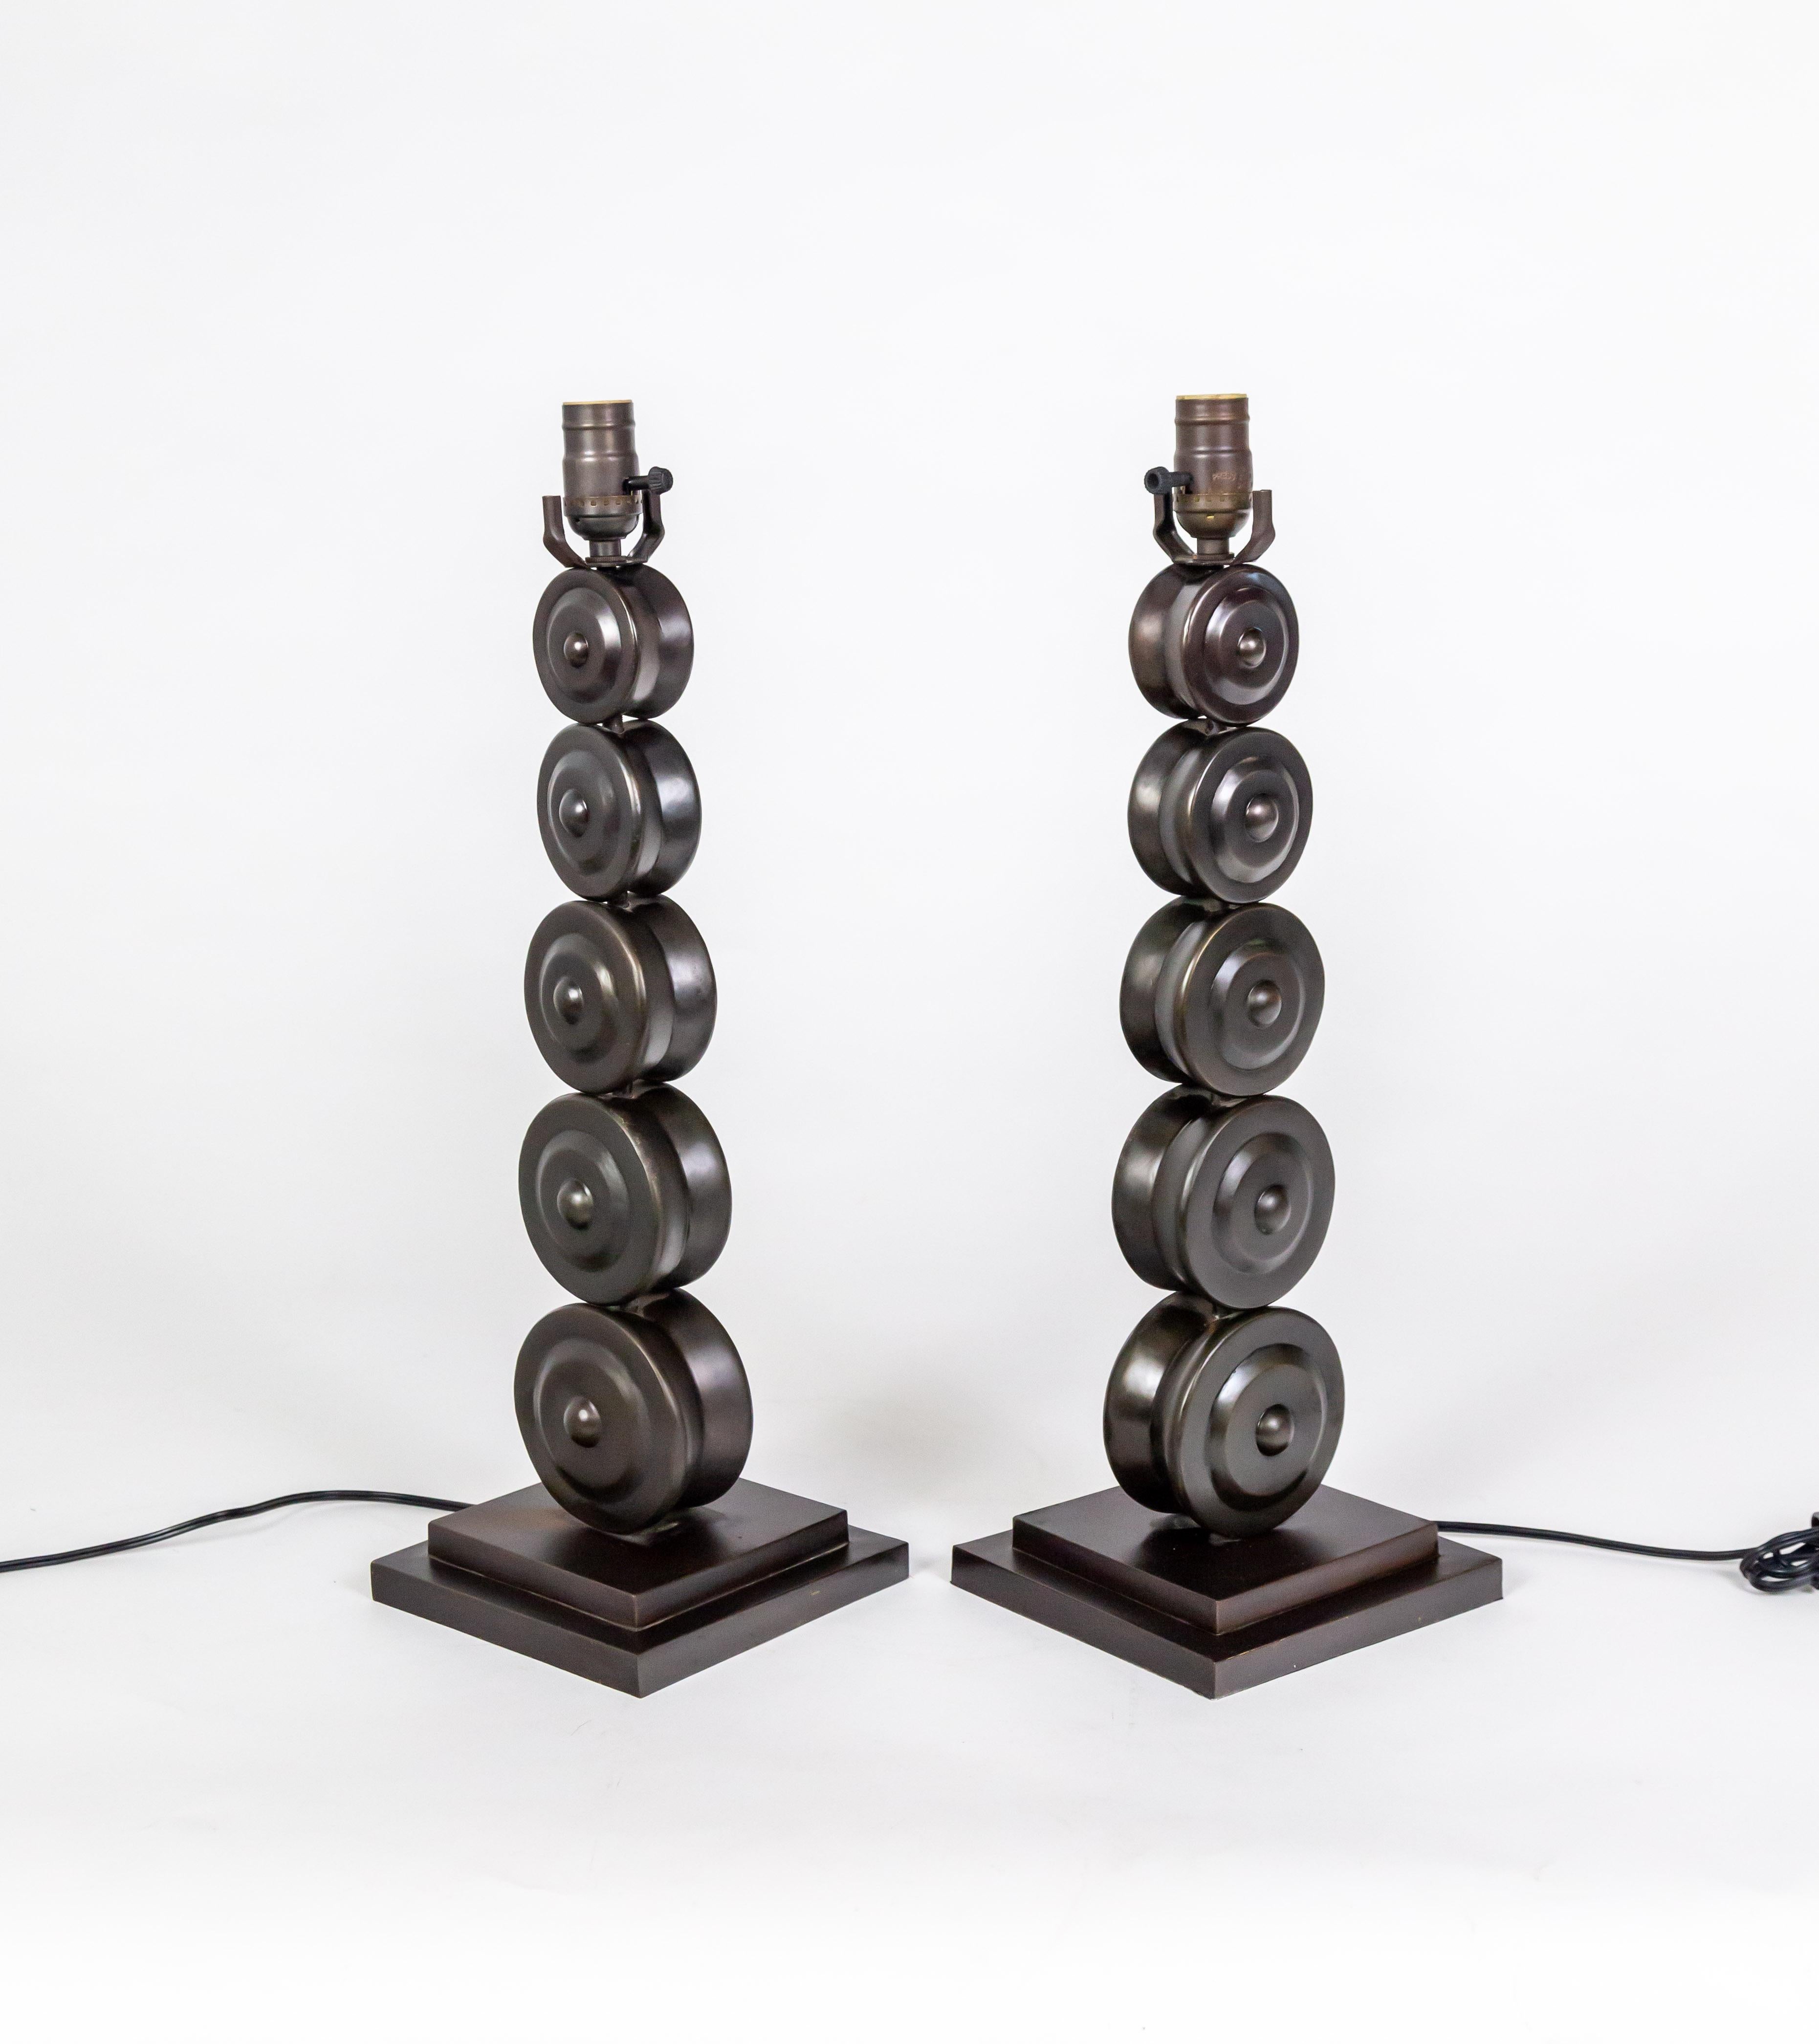 A pair of brass table lamps with an oil-rubbed bronze patina in the form of stacked wheel shapes, tapering slightly in size, sitting on square bases. This sculptural design looks great in traditional, modern, and contemporary interiors. Newly wired.